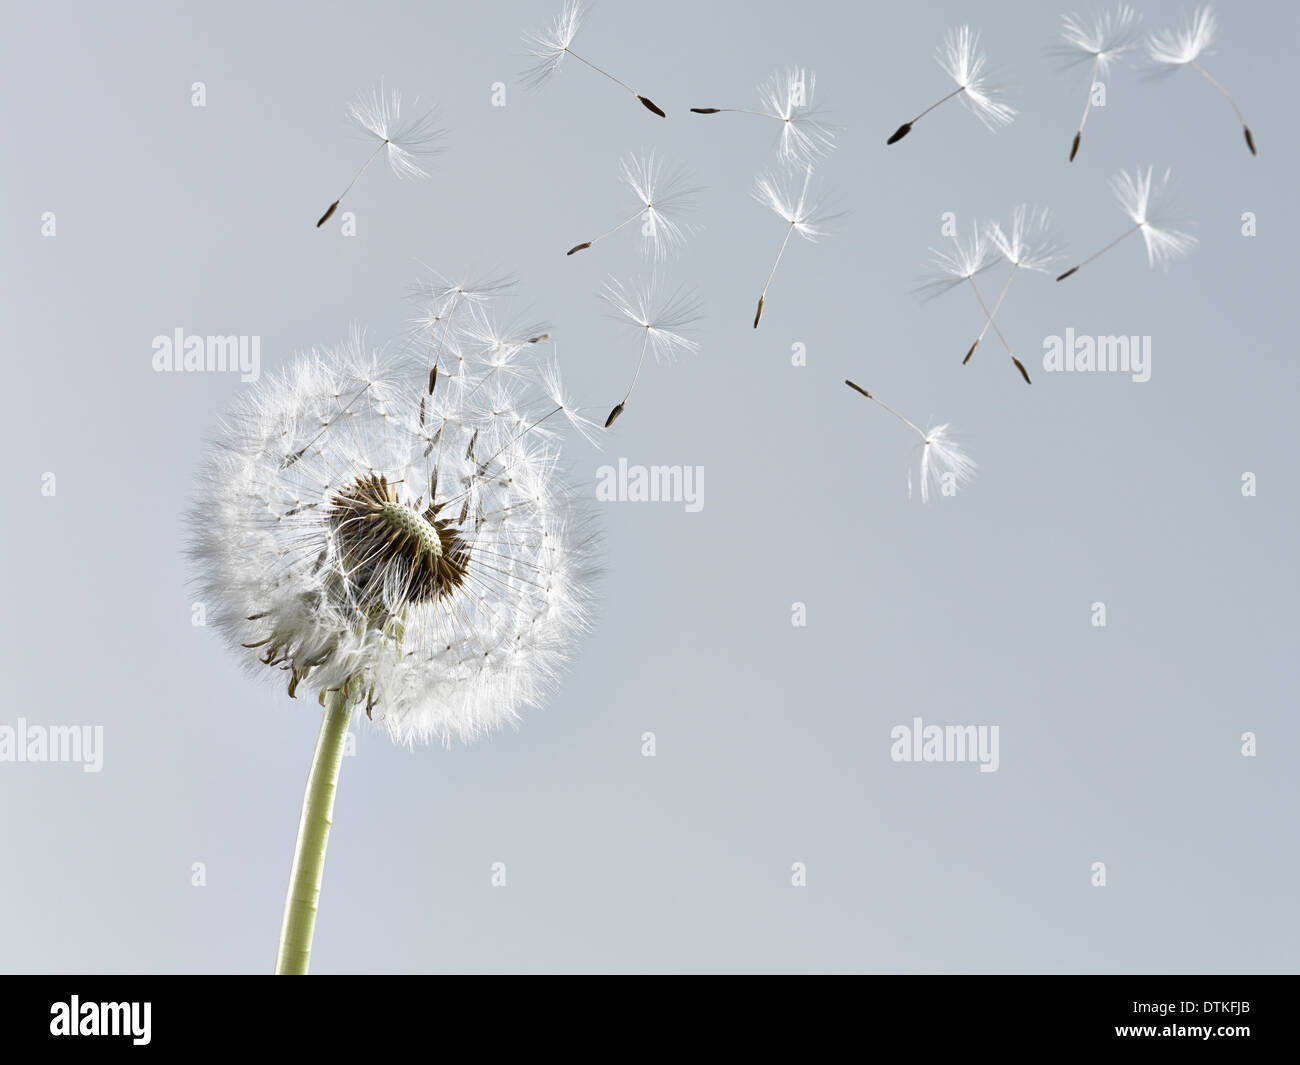 Close up of dandelion plant blowing in wind Stock Photo